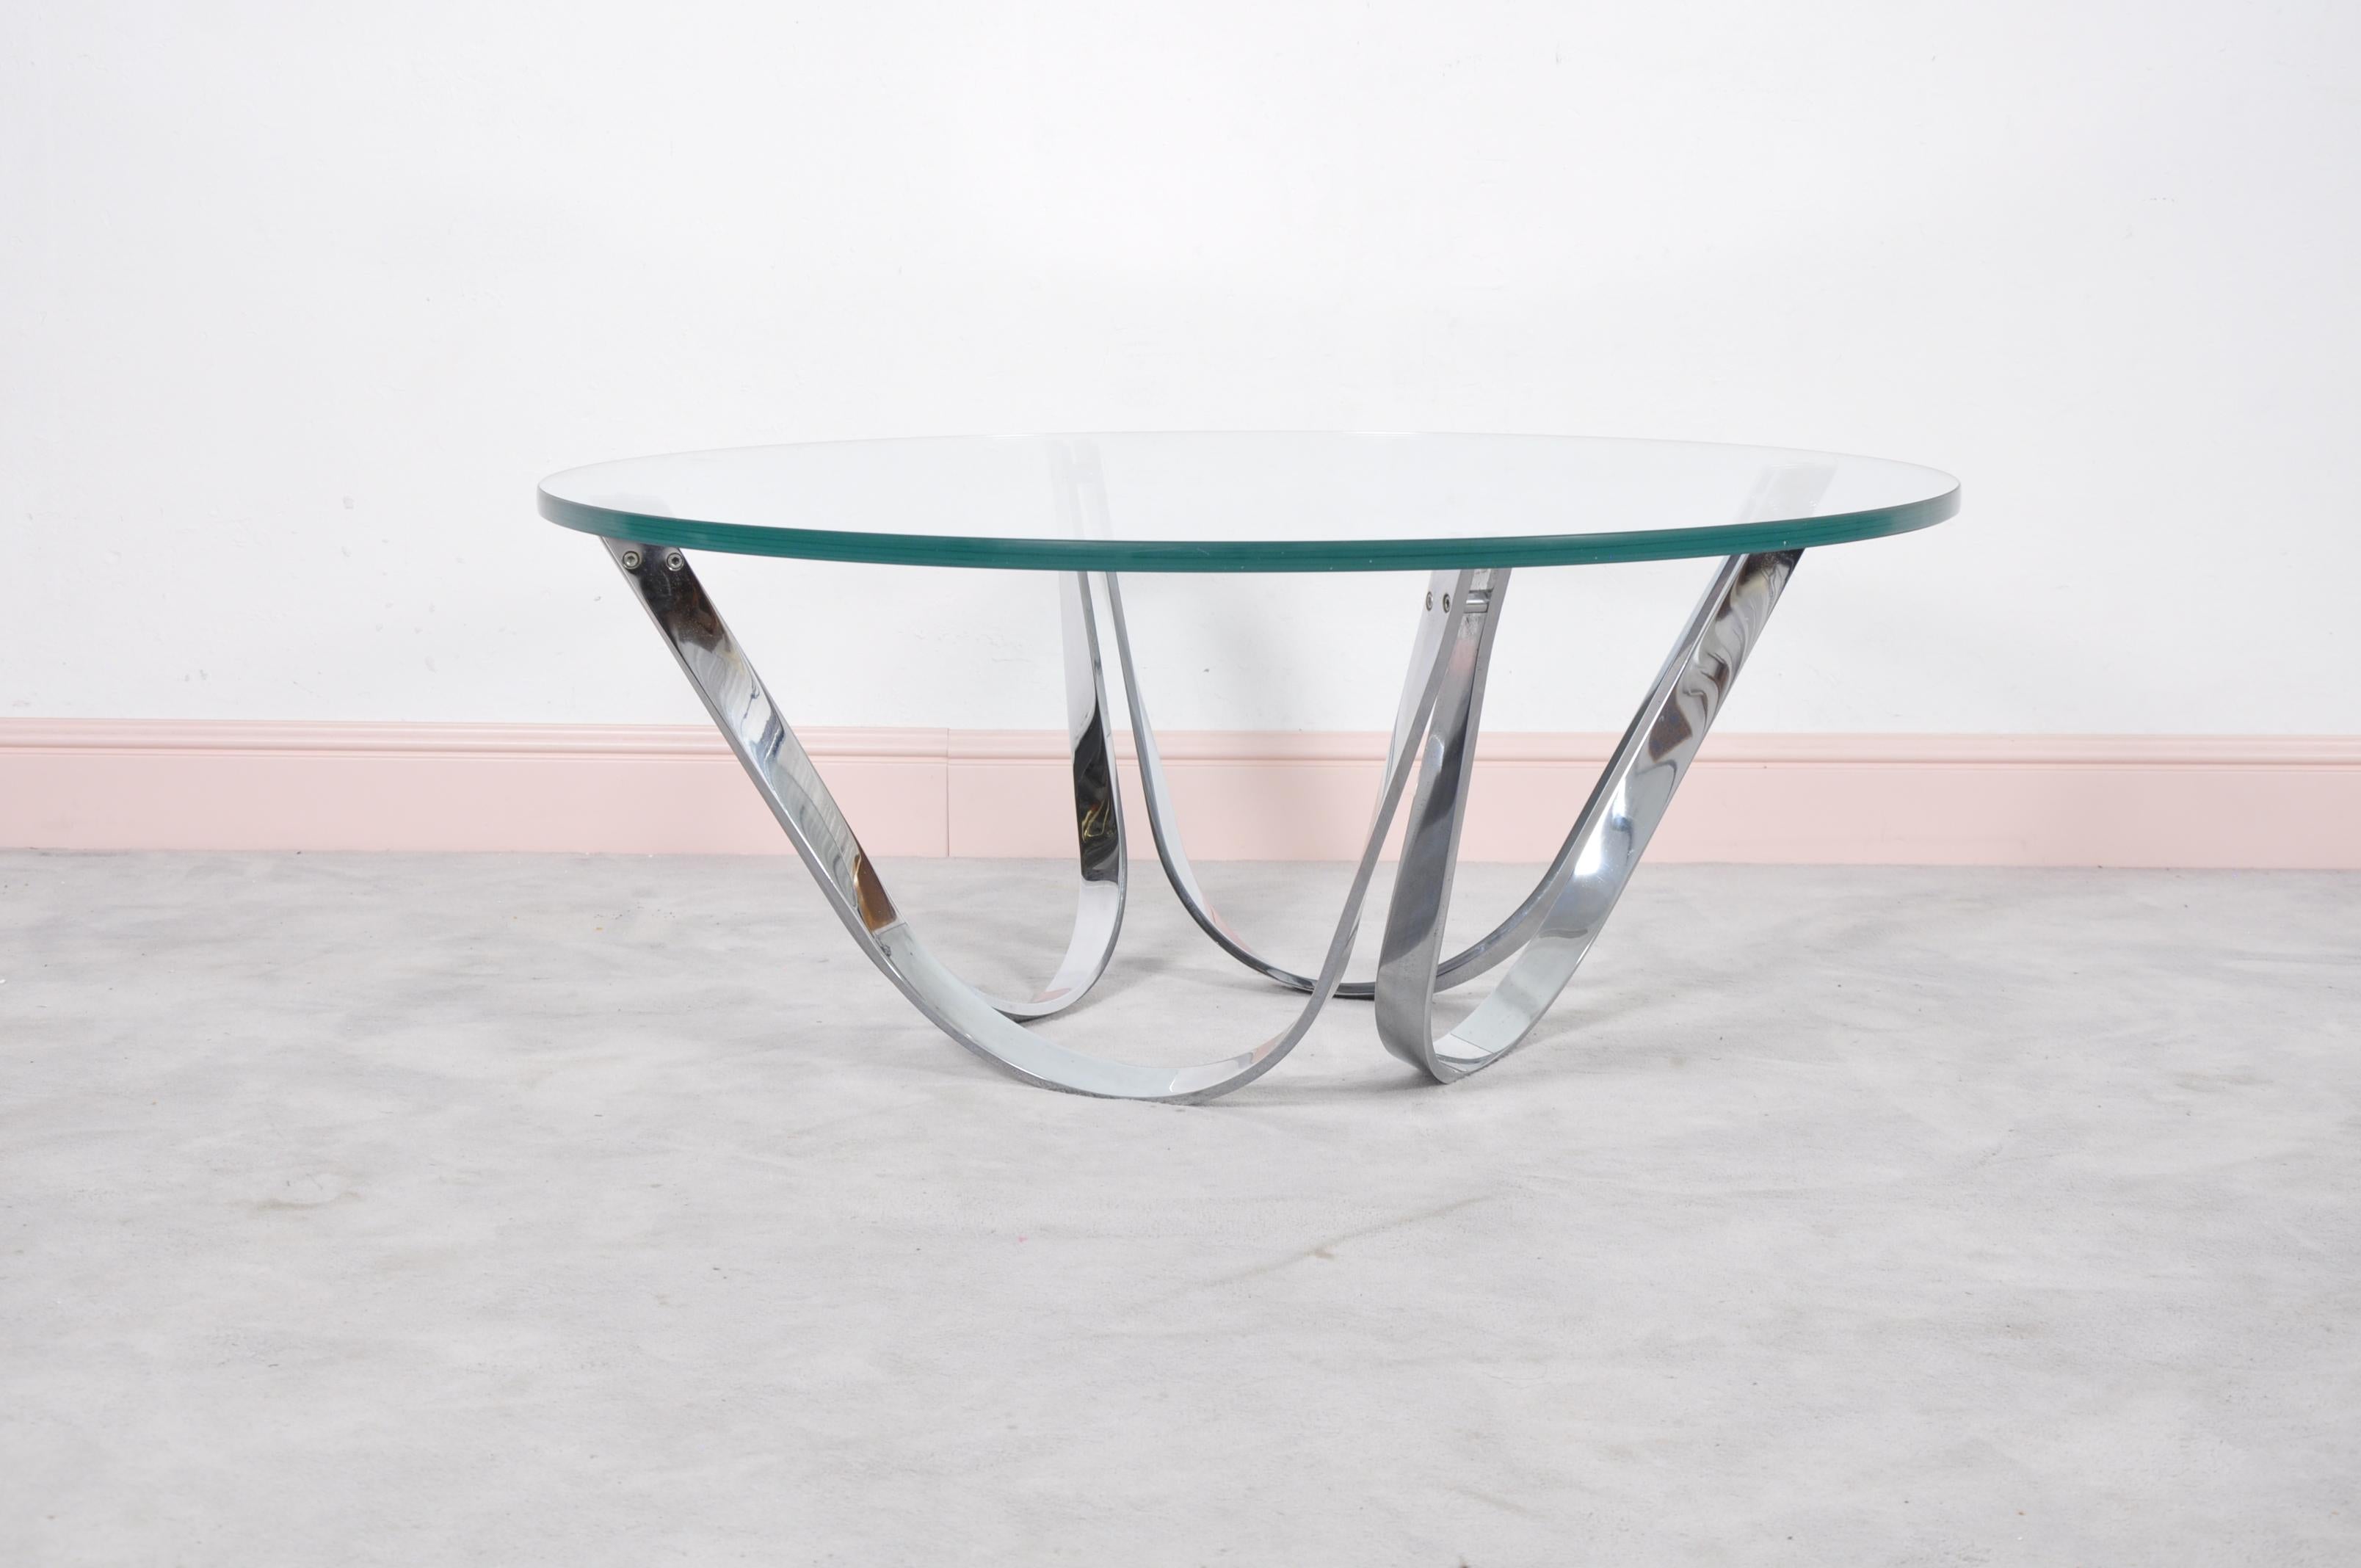 Round coffee table by American designer Roger Sprunger from the 1970s. Produced by Dunbar Furniture, USA. Chromed flattened steel frame and loose 2 cm thick crystal tabletop.